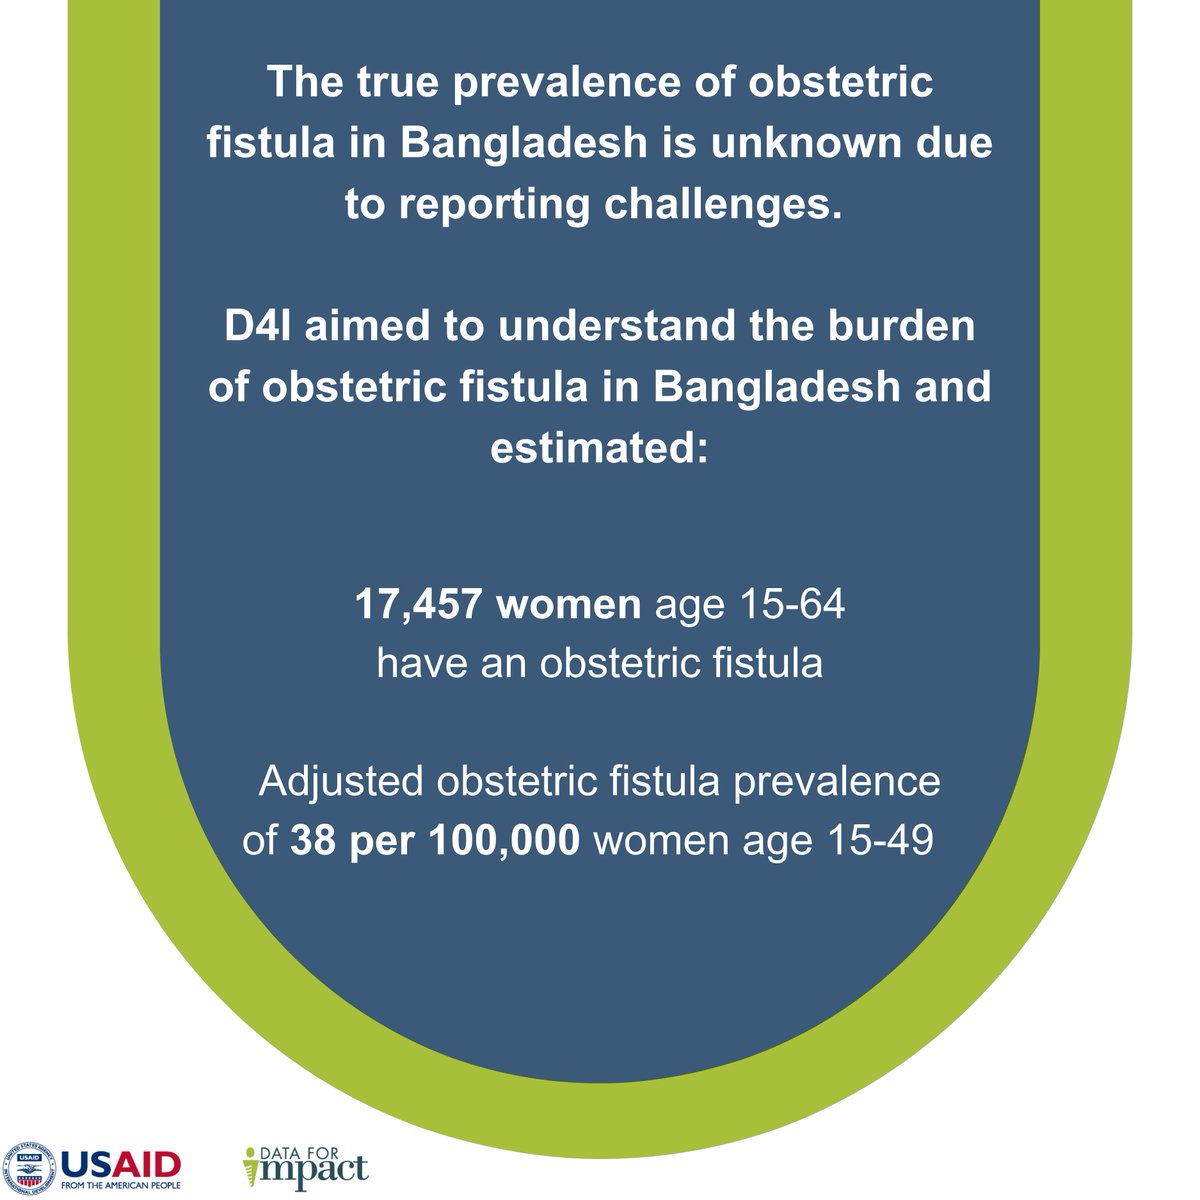 ⬇️ D4I's most recent obstetric fistula publication & learn how researchers estimated the prevalence & burden in #Bangladesh. #EndFistula  
ow.ly/kEyy50Oy52V